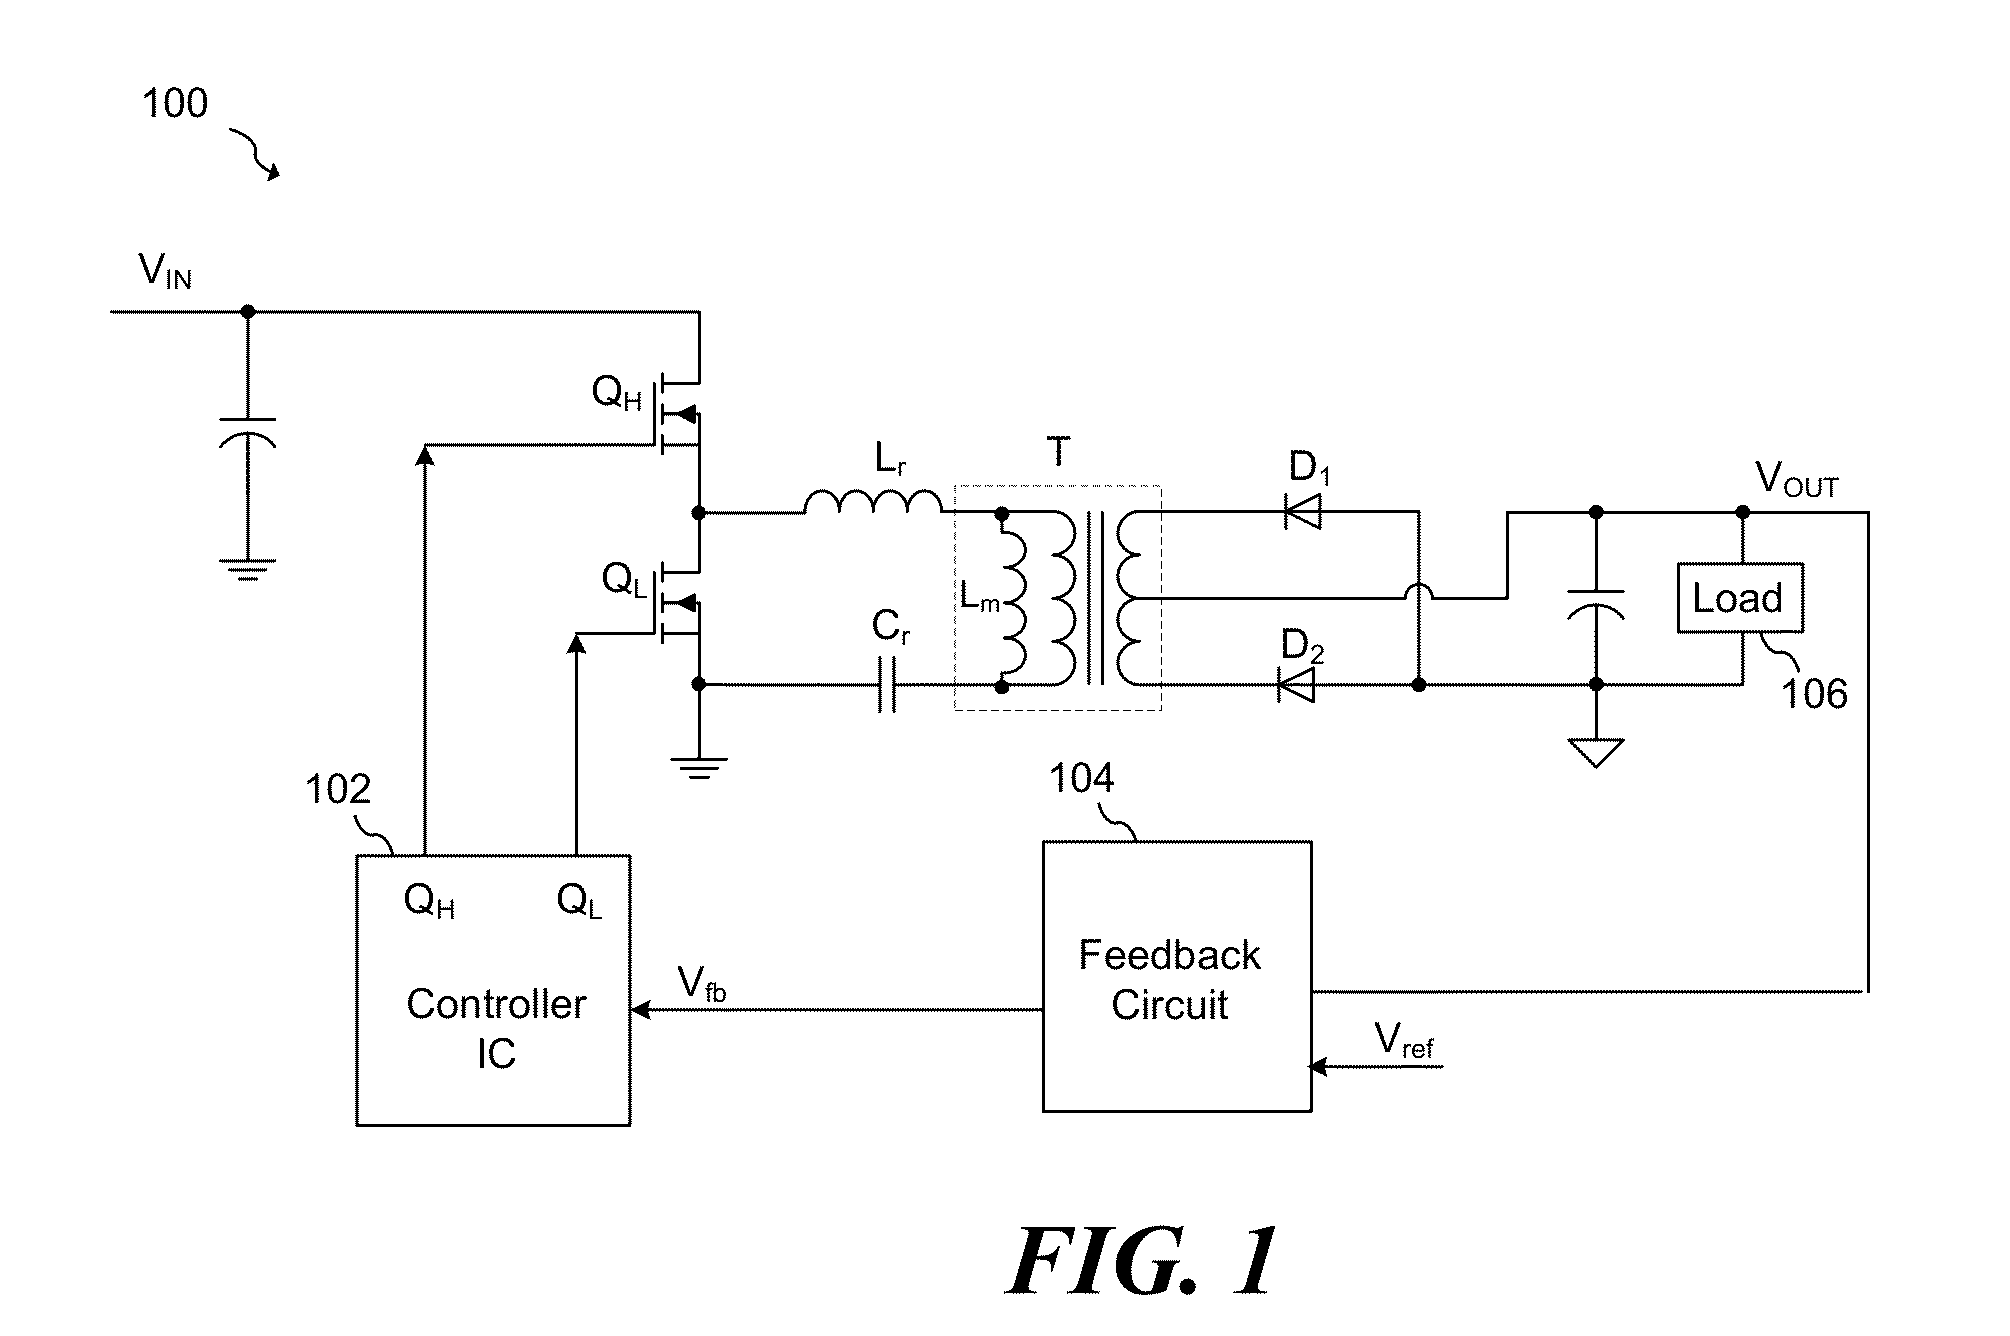 Multi-Mode Operation and Control of a Resonant Converter